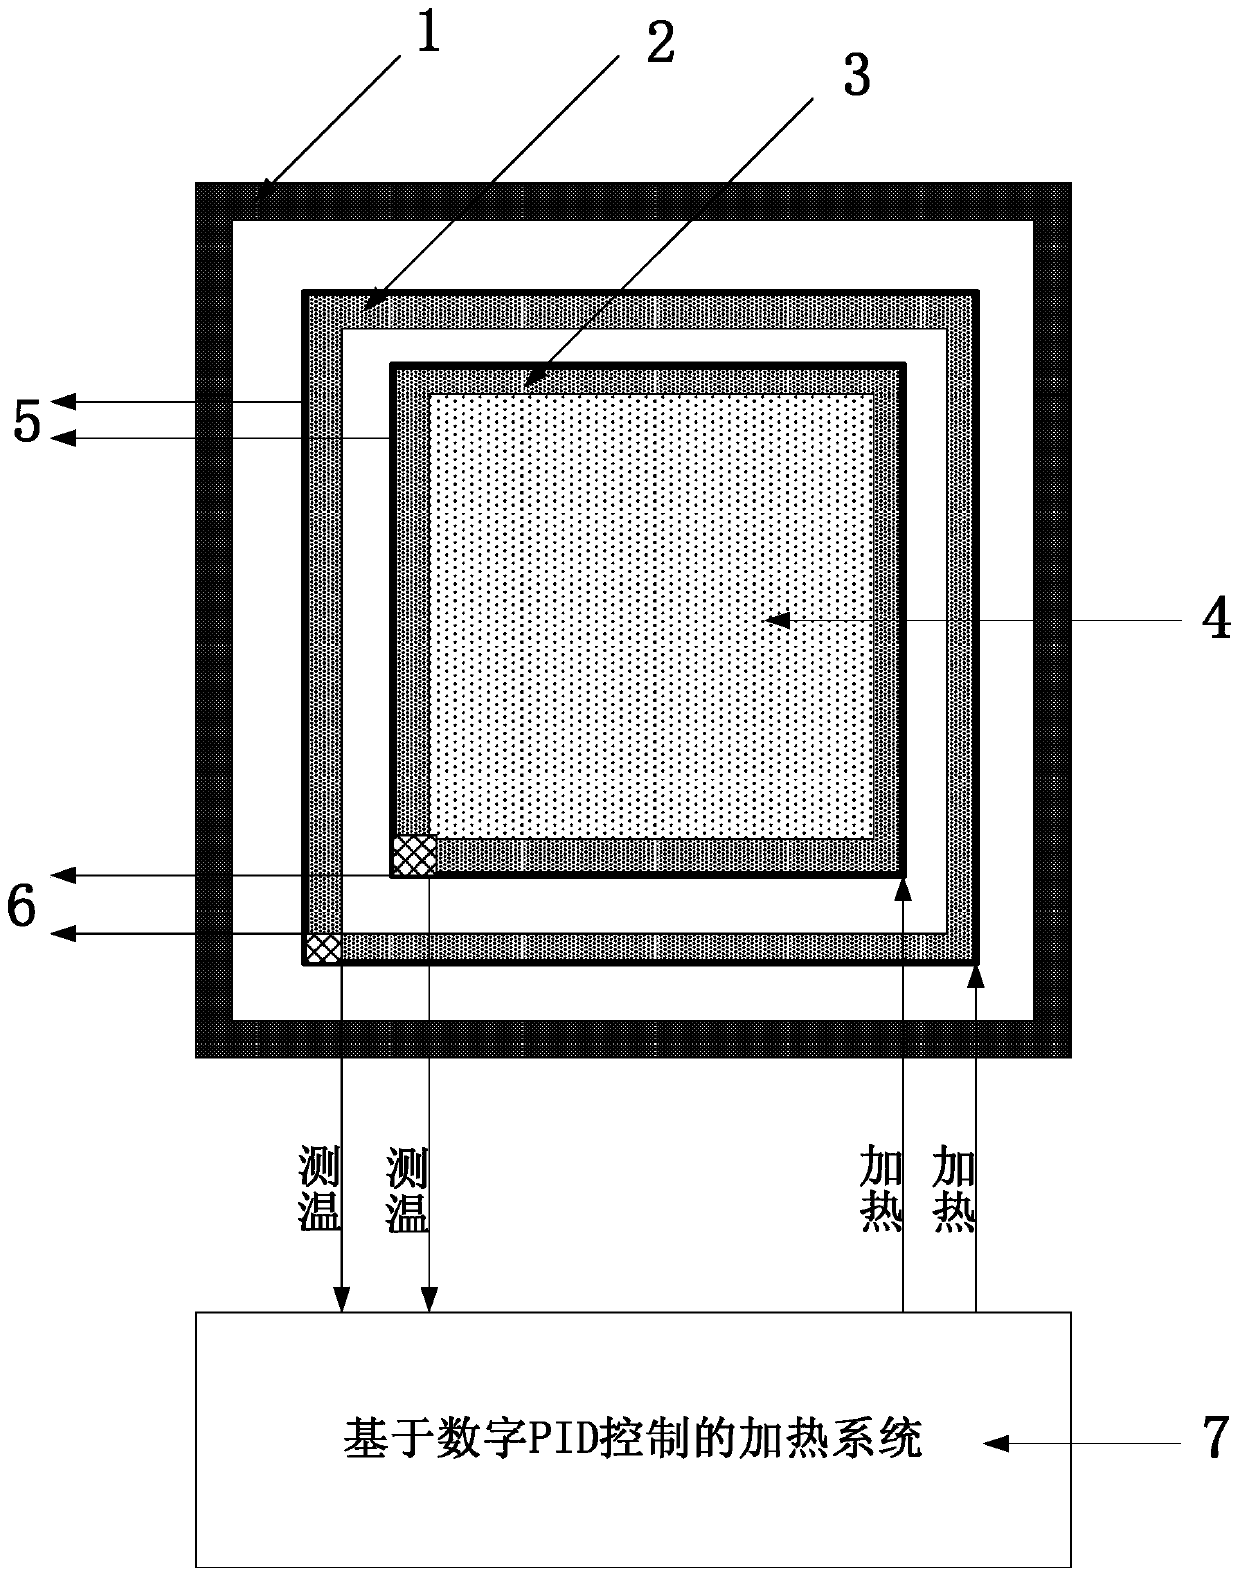 Double-heating-layer thermal insulation device for SERF atom air chamber